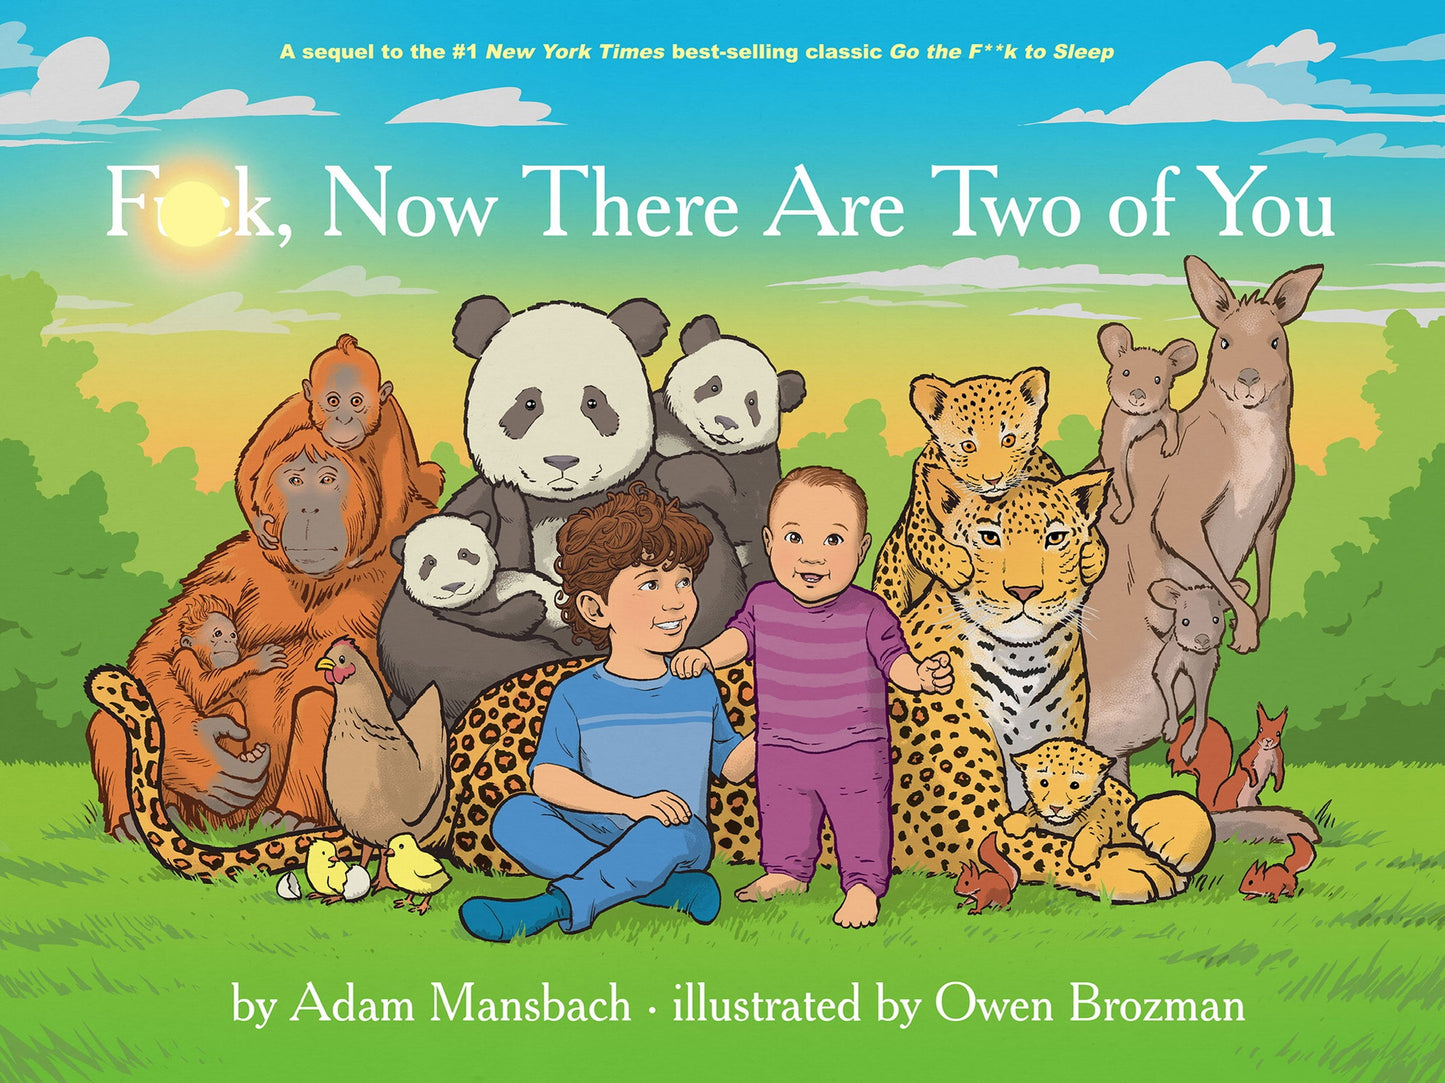 F**k, Now There Are Two of You by Adam Mansbach